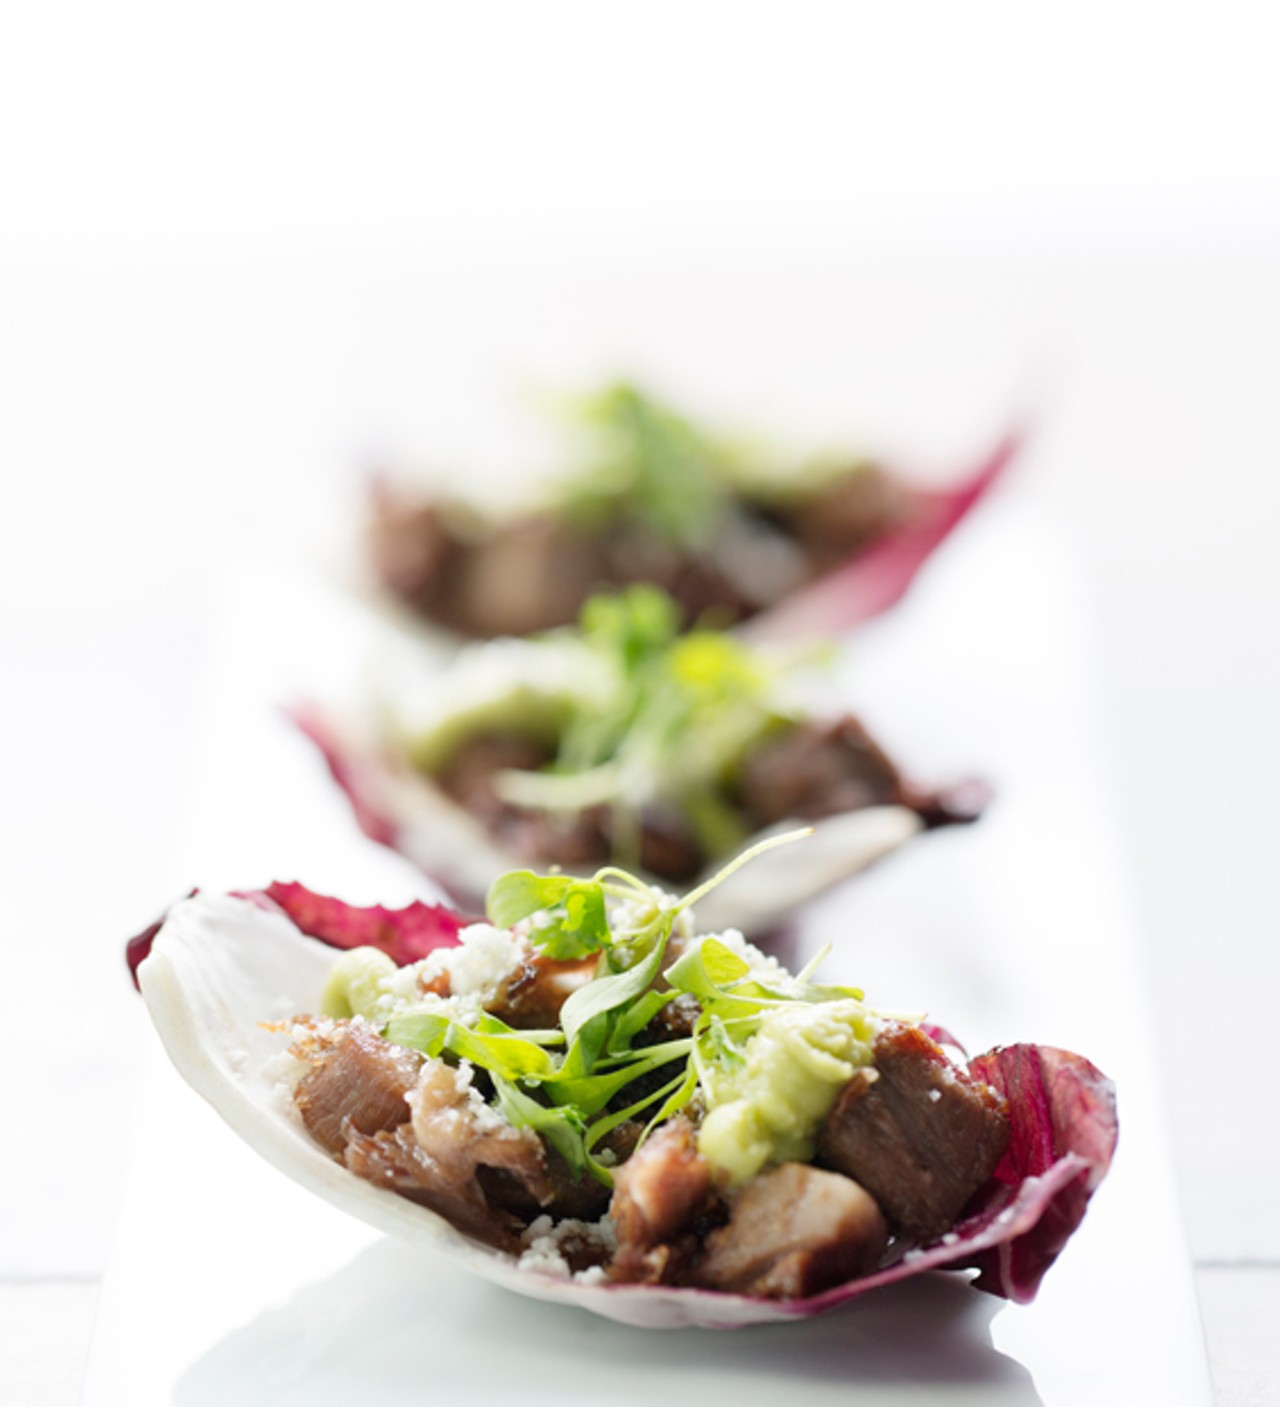 The crispy beef tongue is served with radicchio, fresh cheese, cilantro and avocado cream.